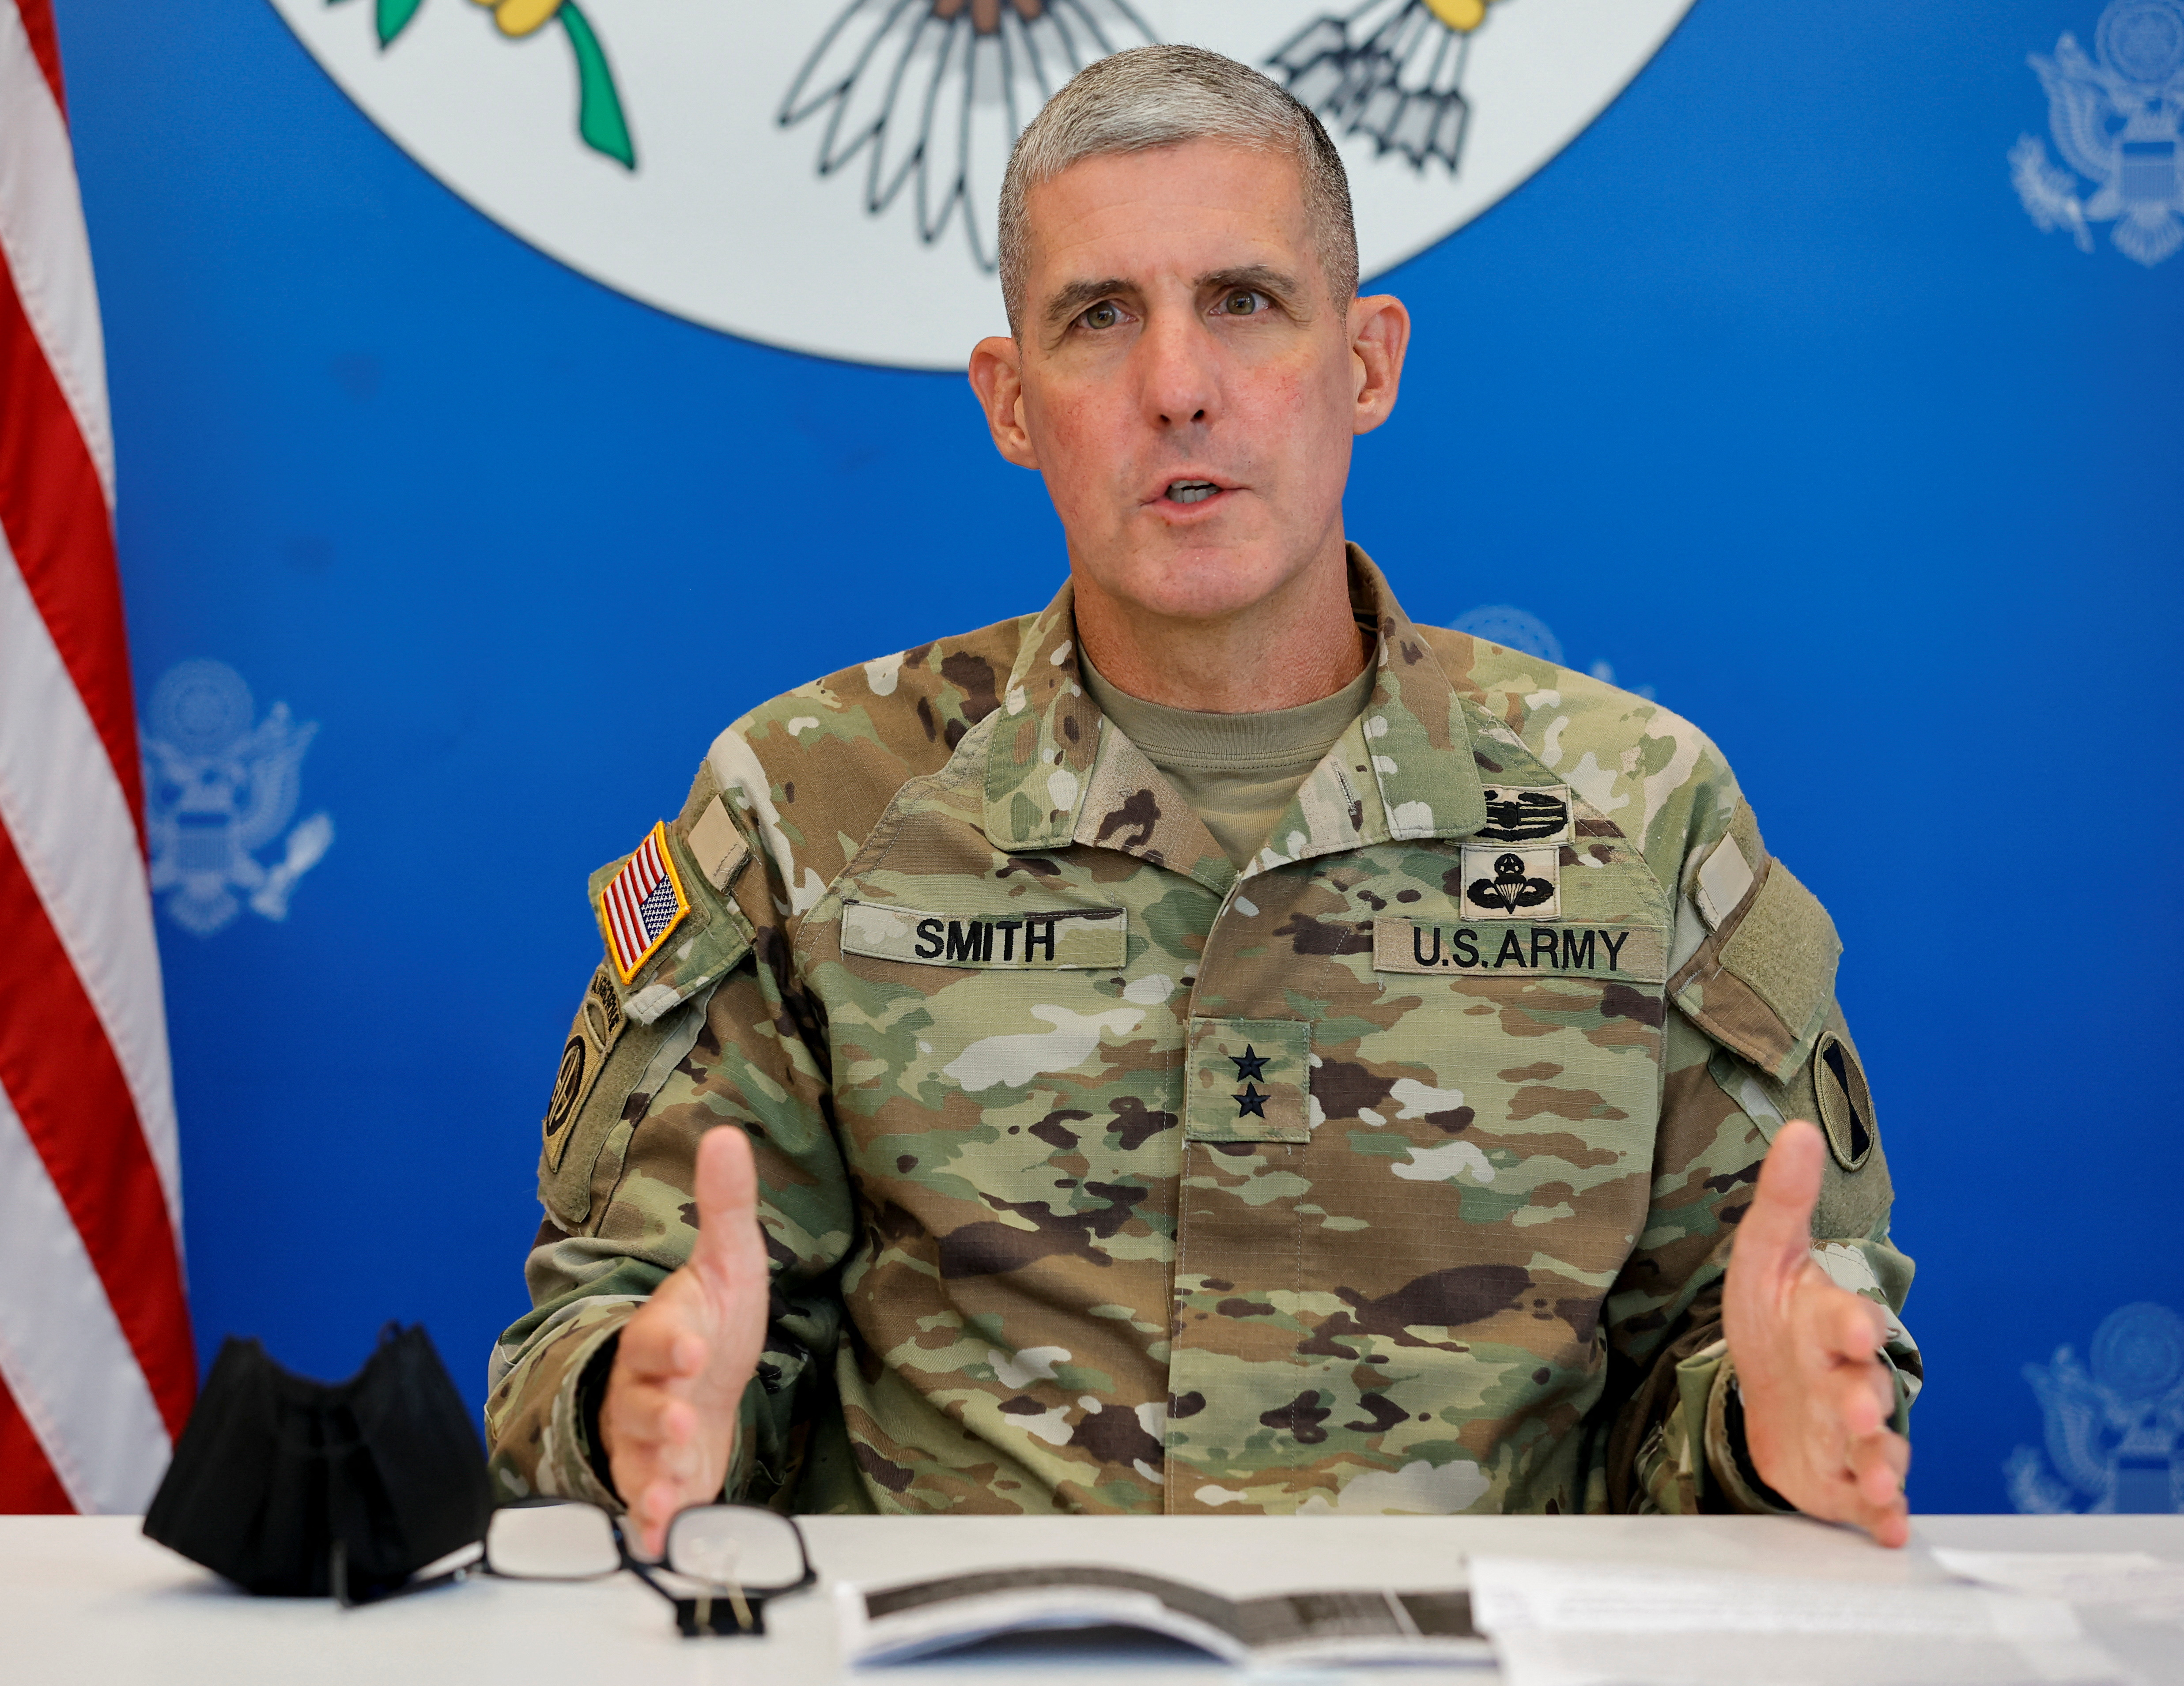 U.S. Commanding General for the 7th Infantry Division Major General Stephen G. Smith speaks during a news conference, in Jakarta